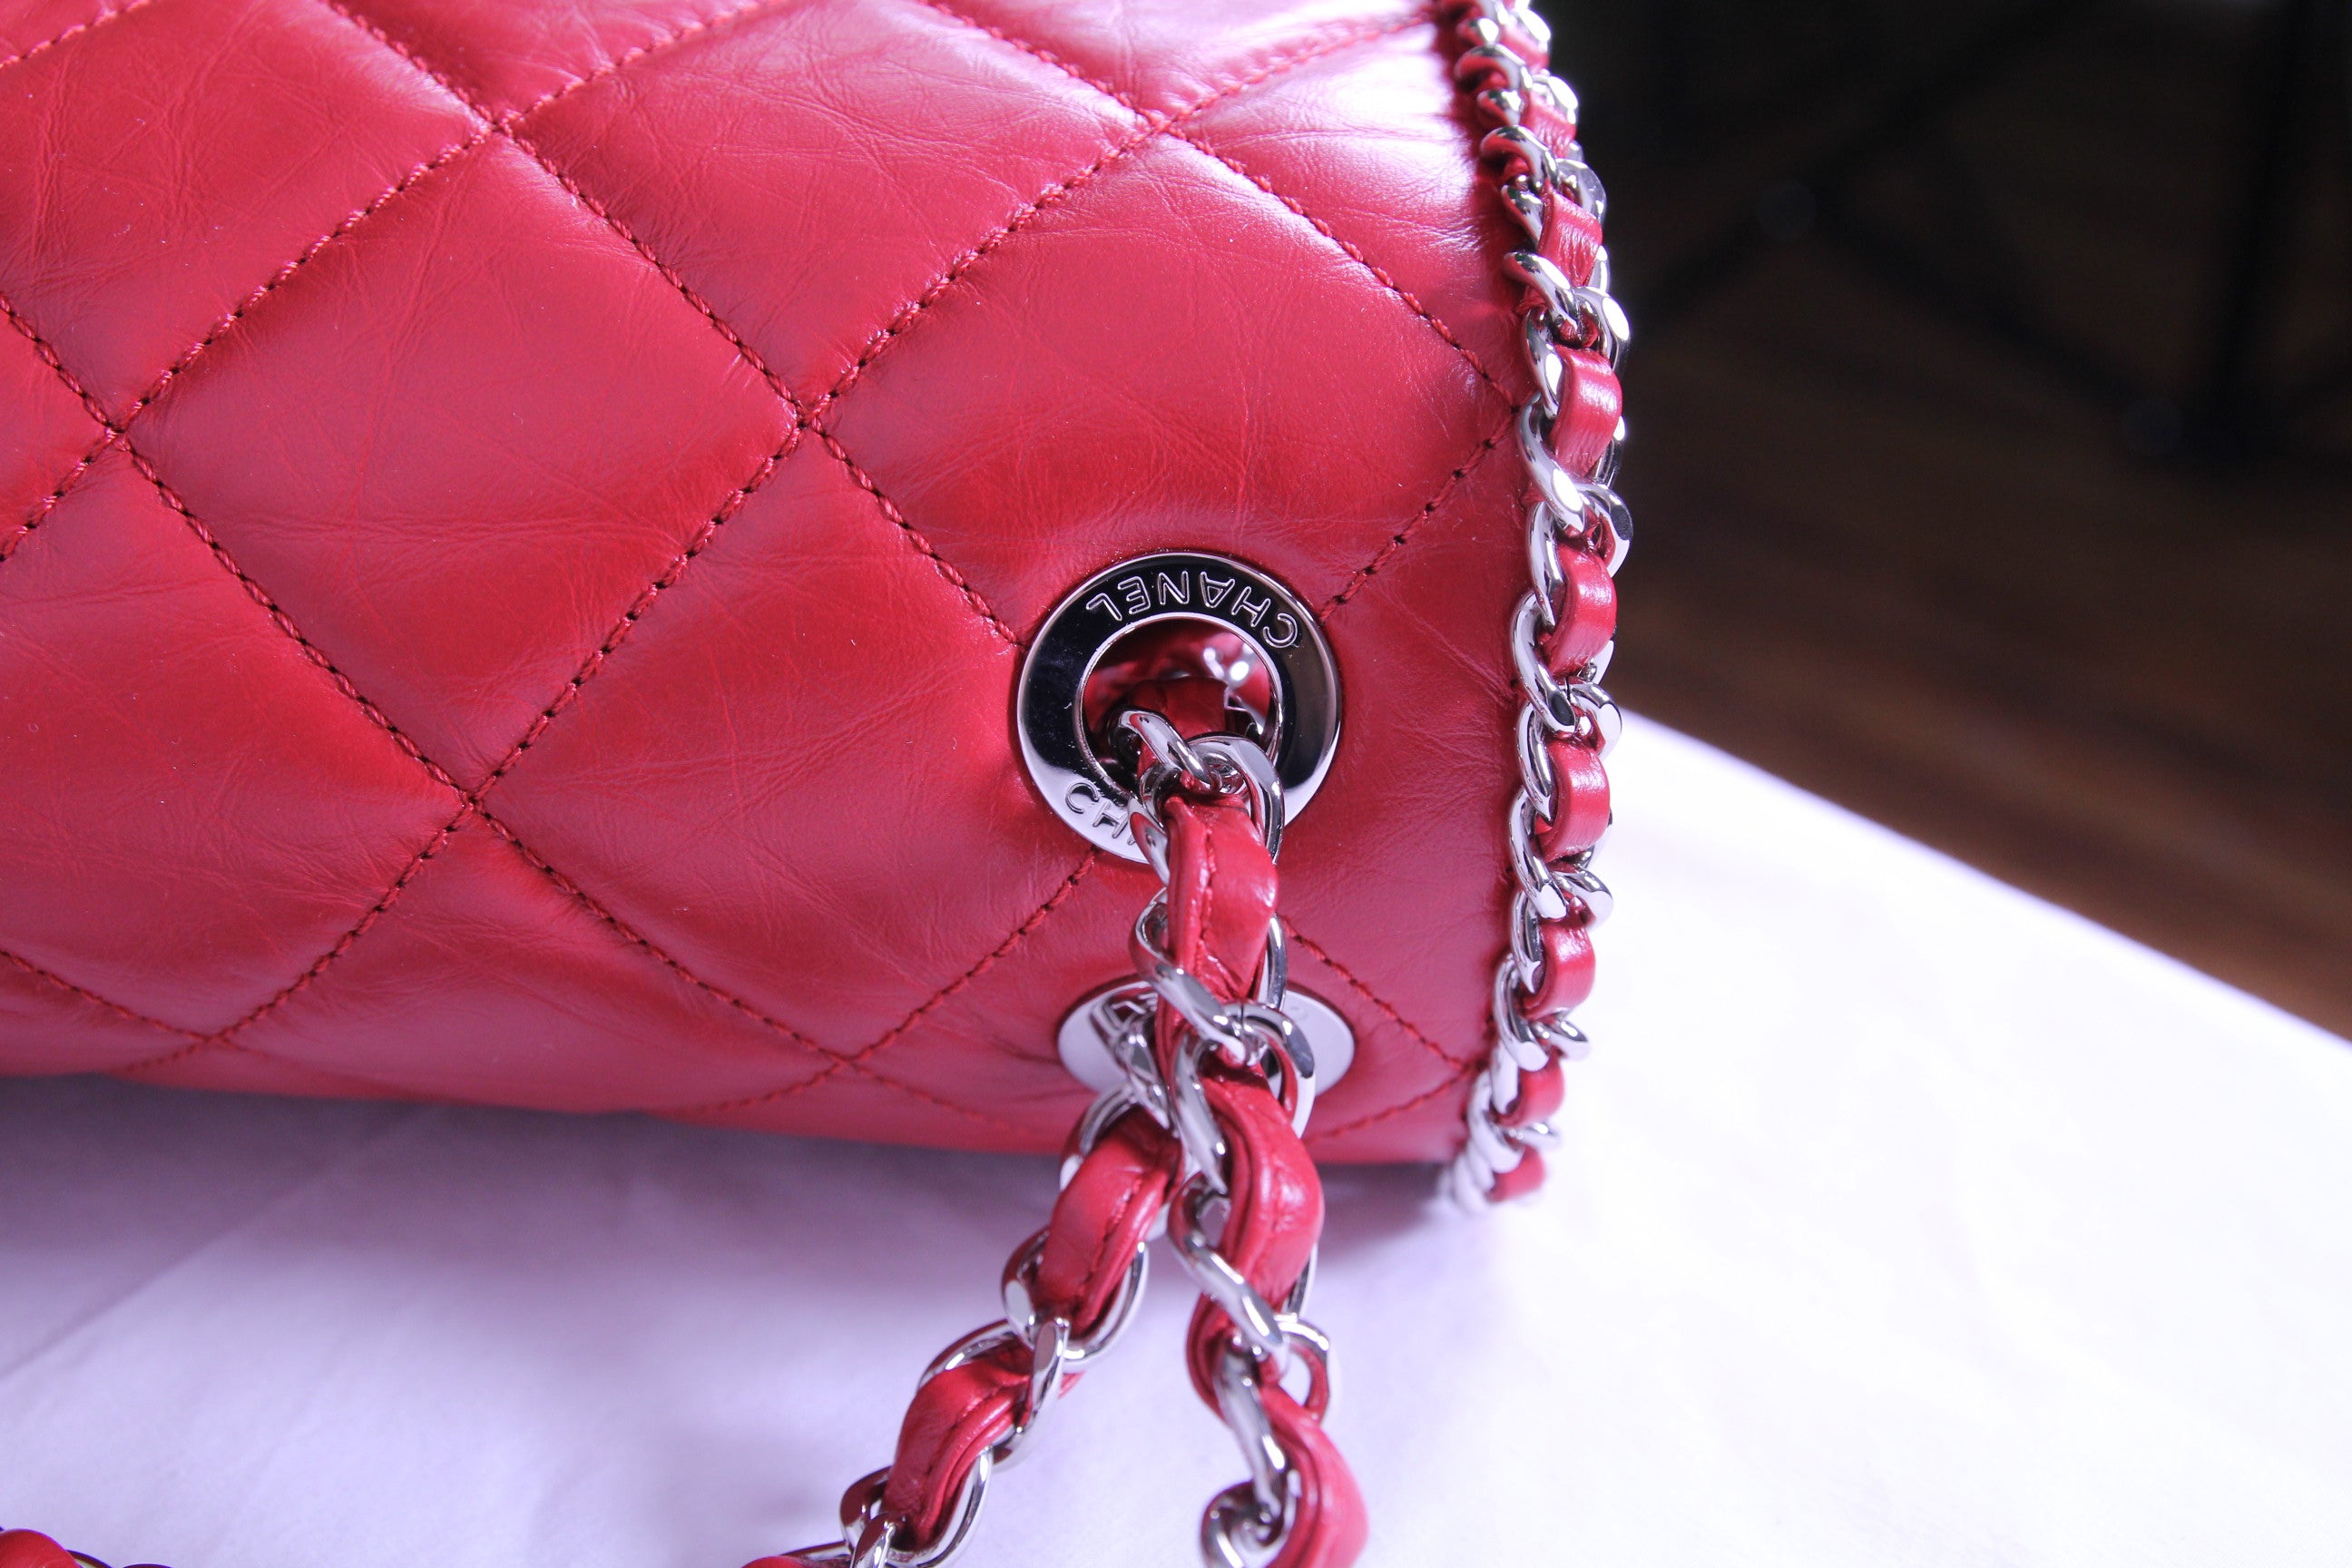 Top of large Chanel flap finished in aged red calfskin